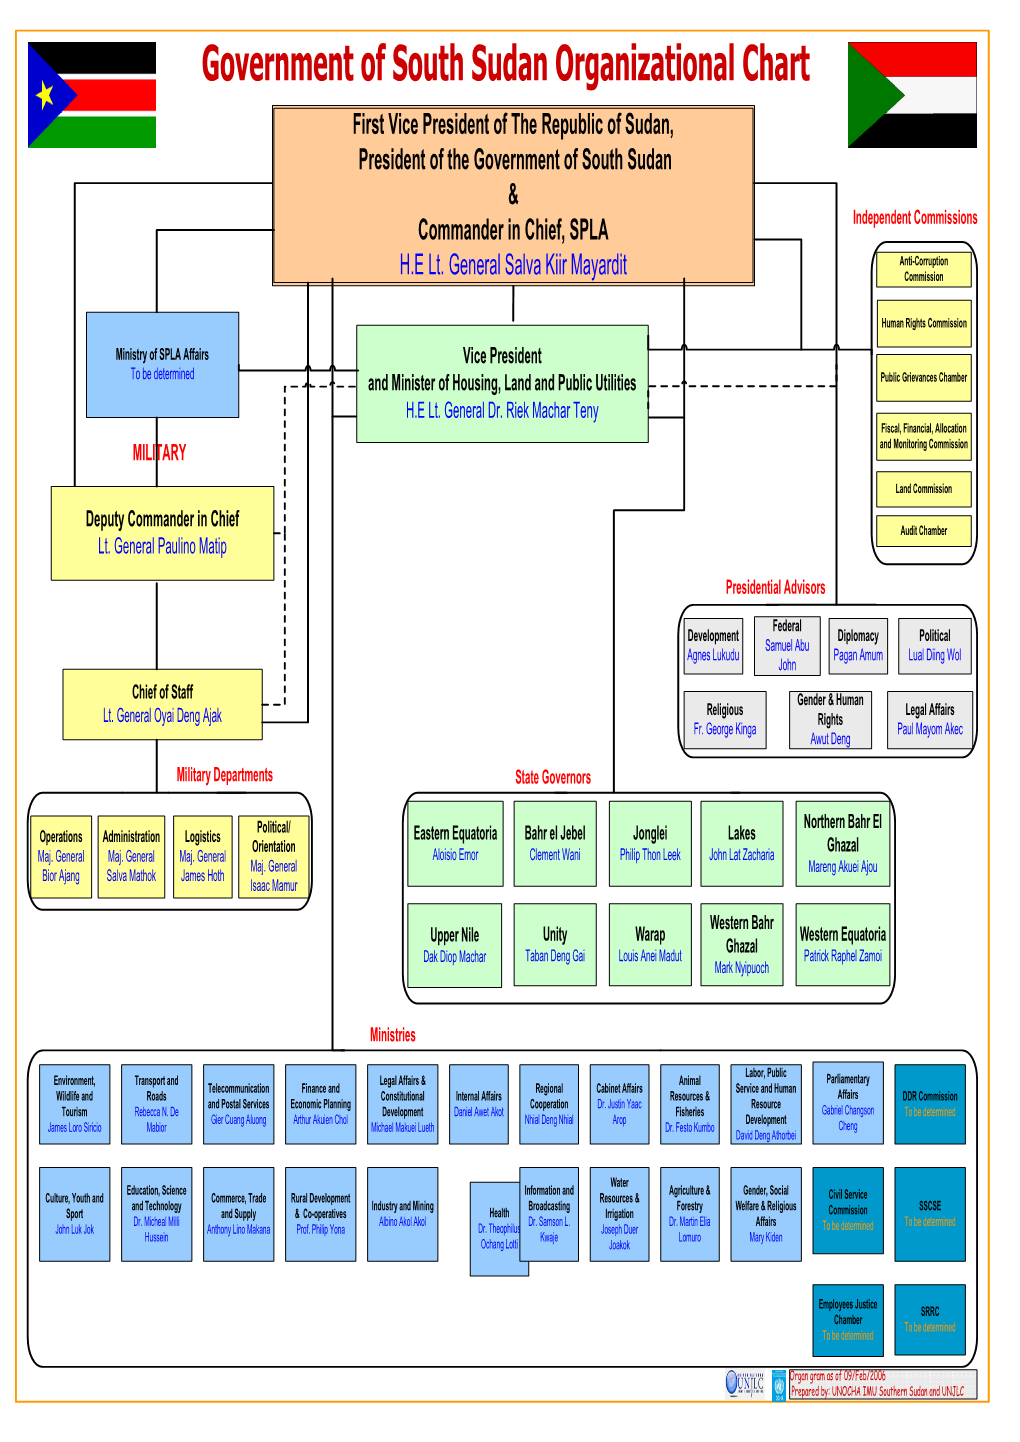 Government of South Sudan Organizational Chart